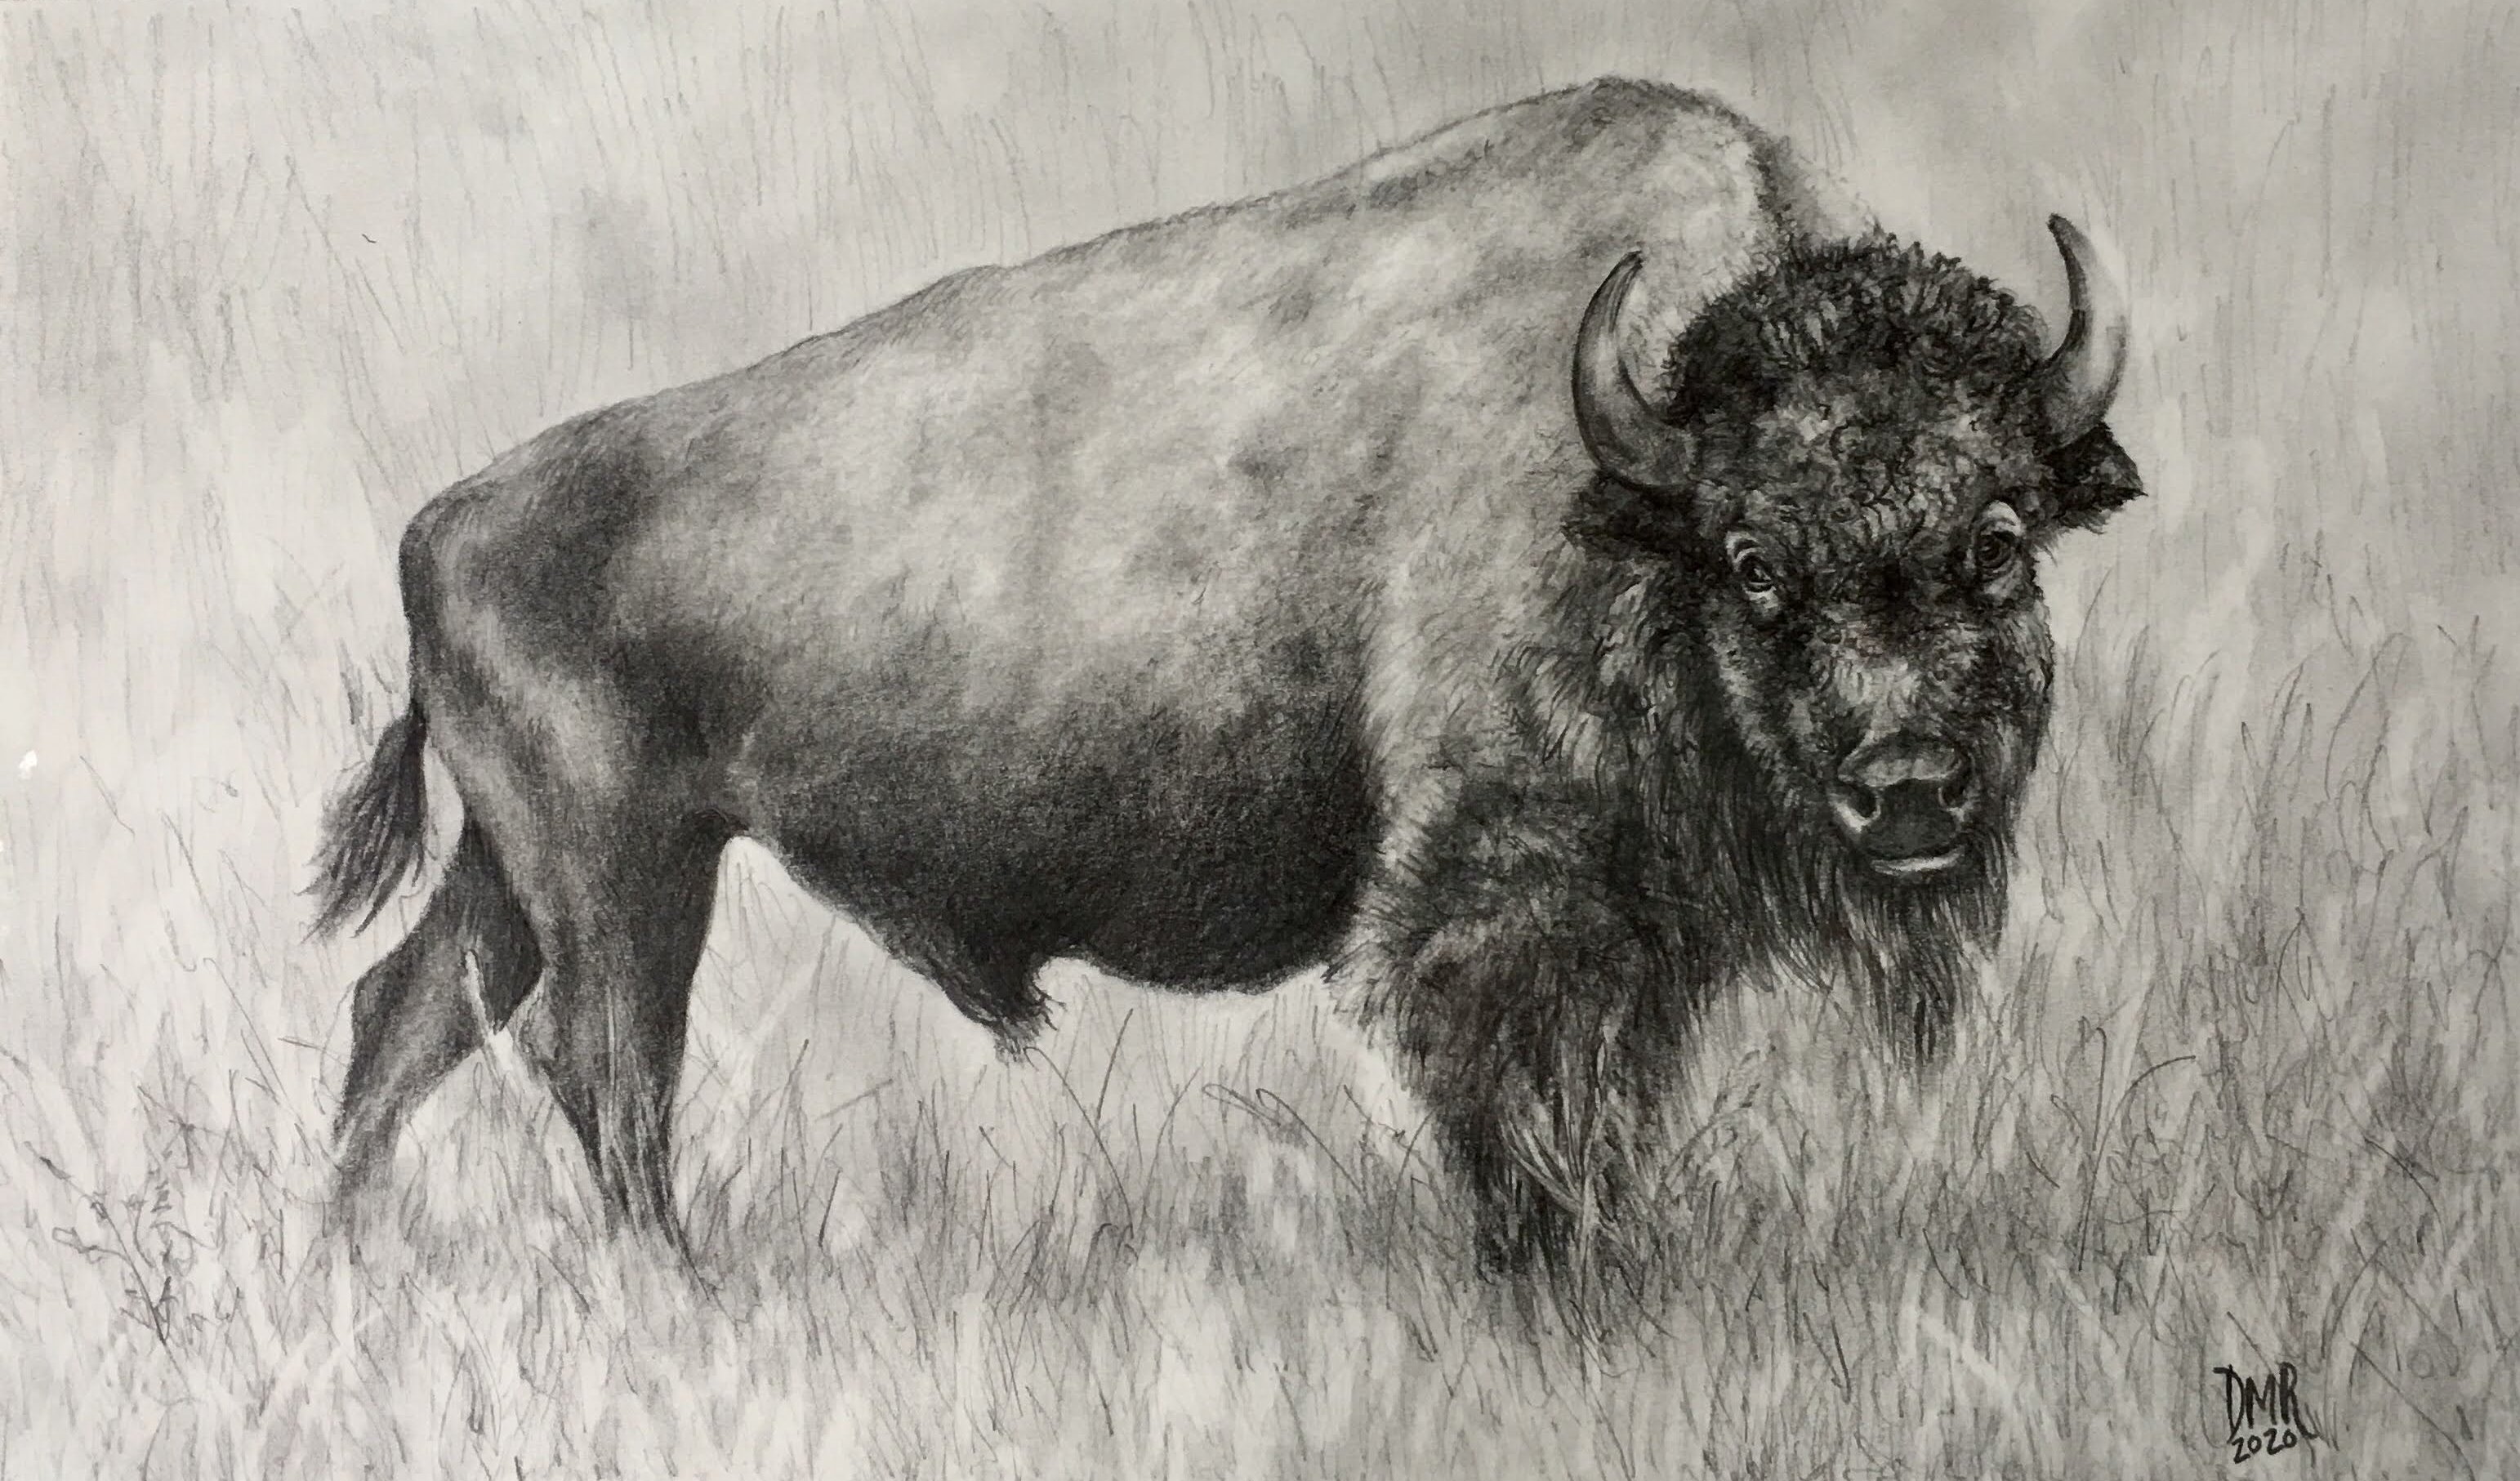 Pencil drawing of a buffalo by Darlene Meader Riggs